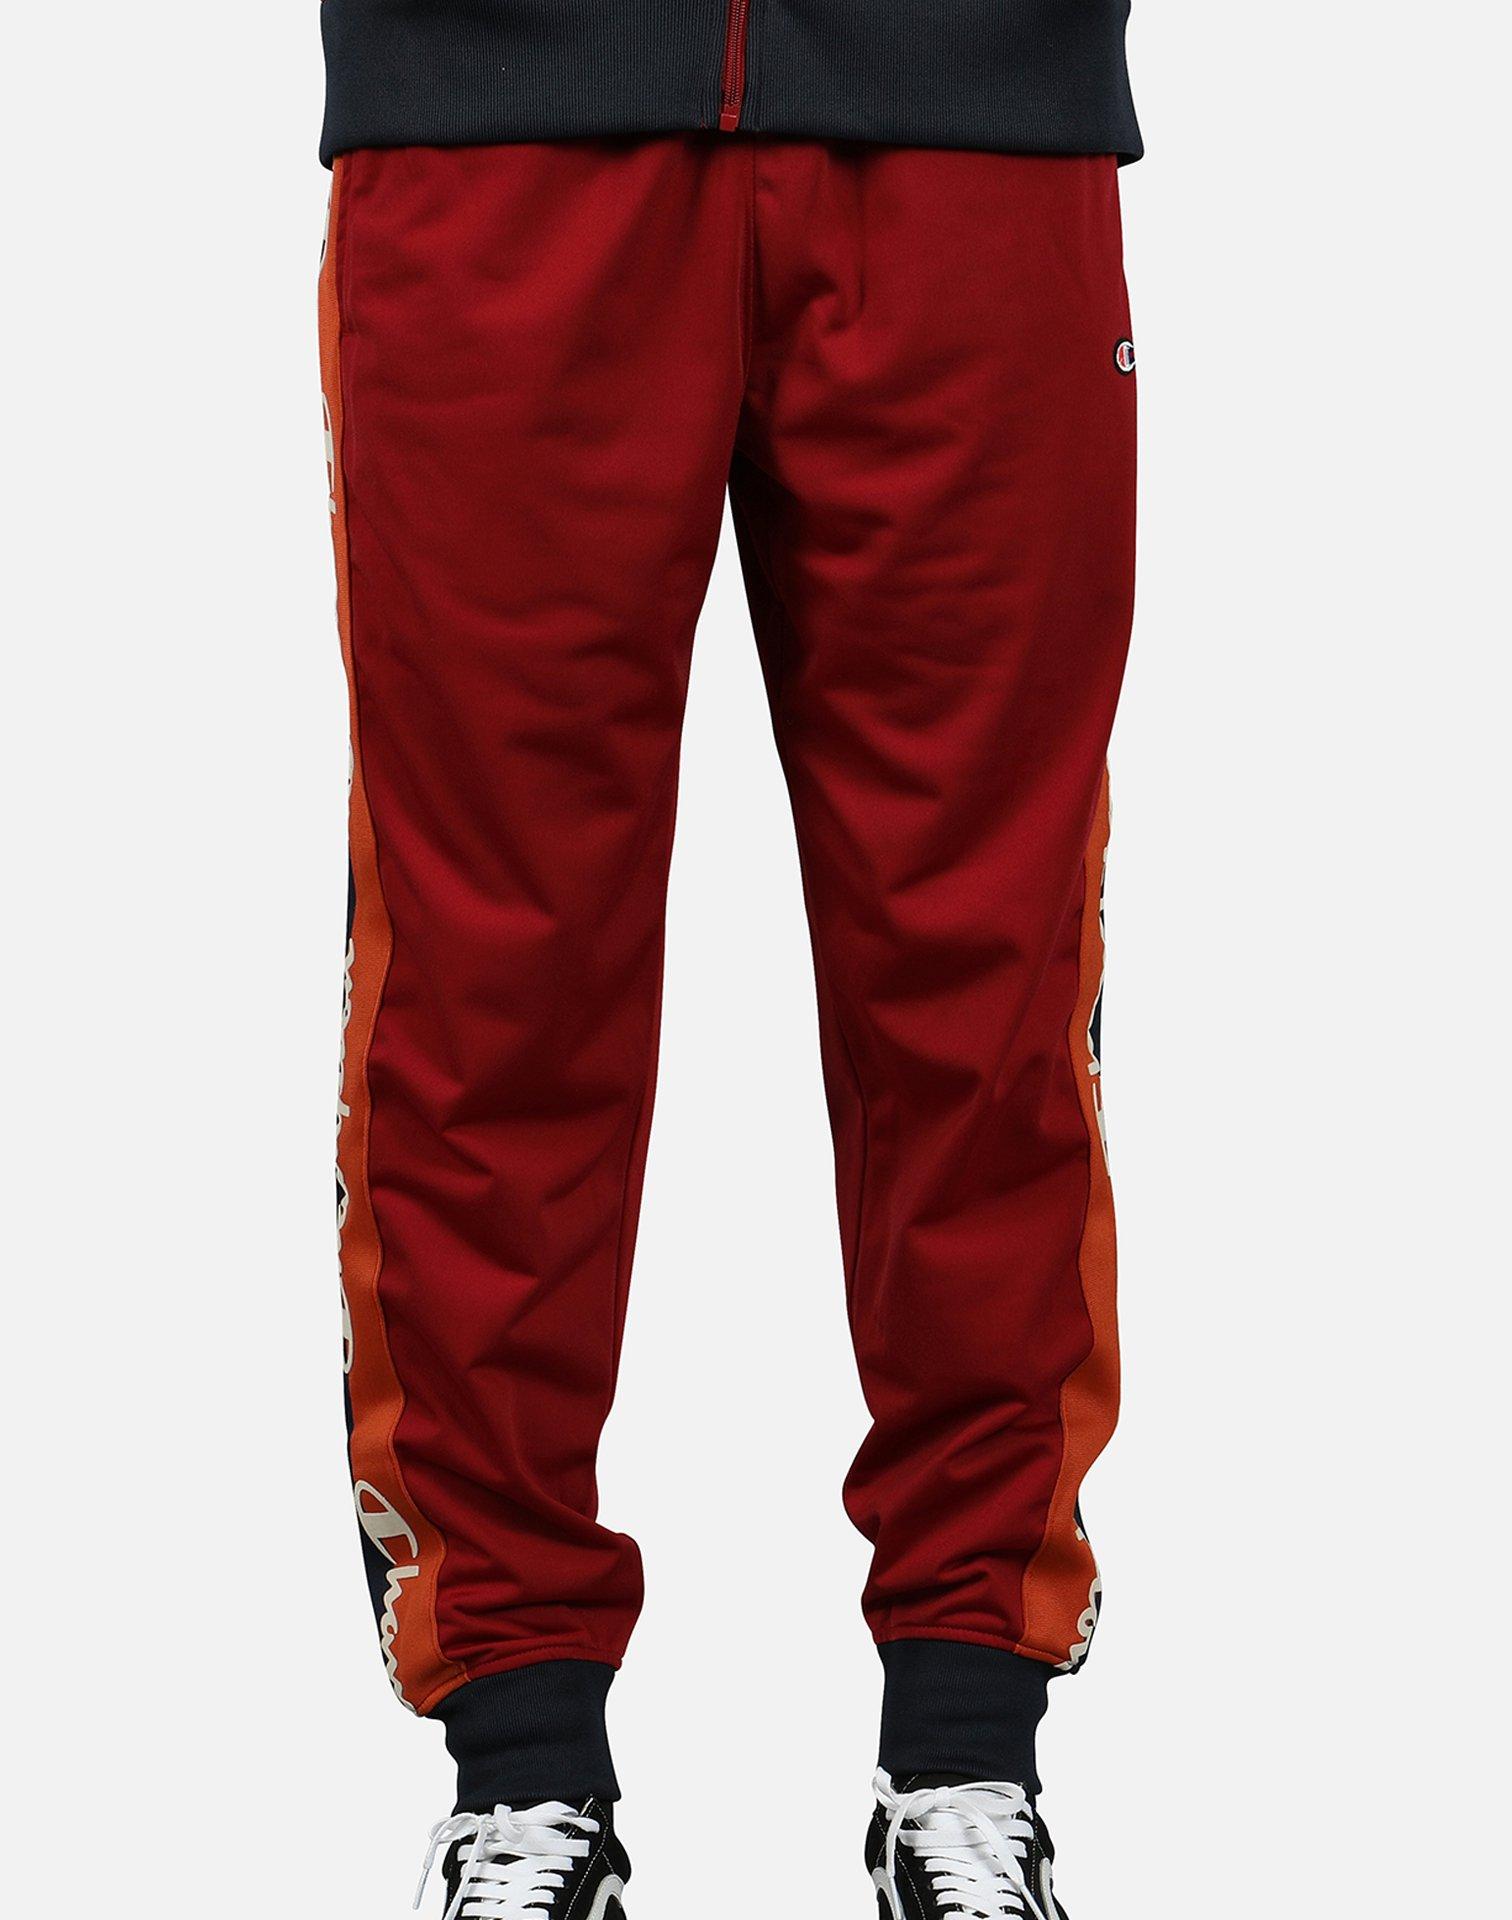 Champion Synthetic Tricot Track Pants in Burgundy (Red) for Men - Lyst